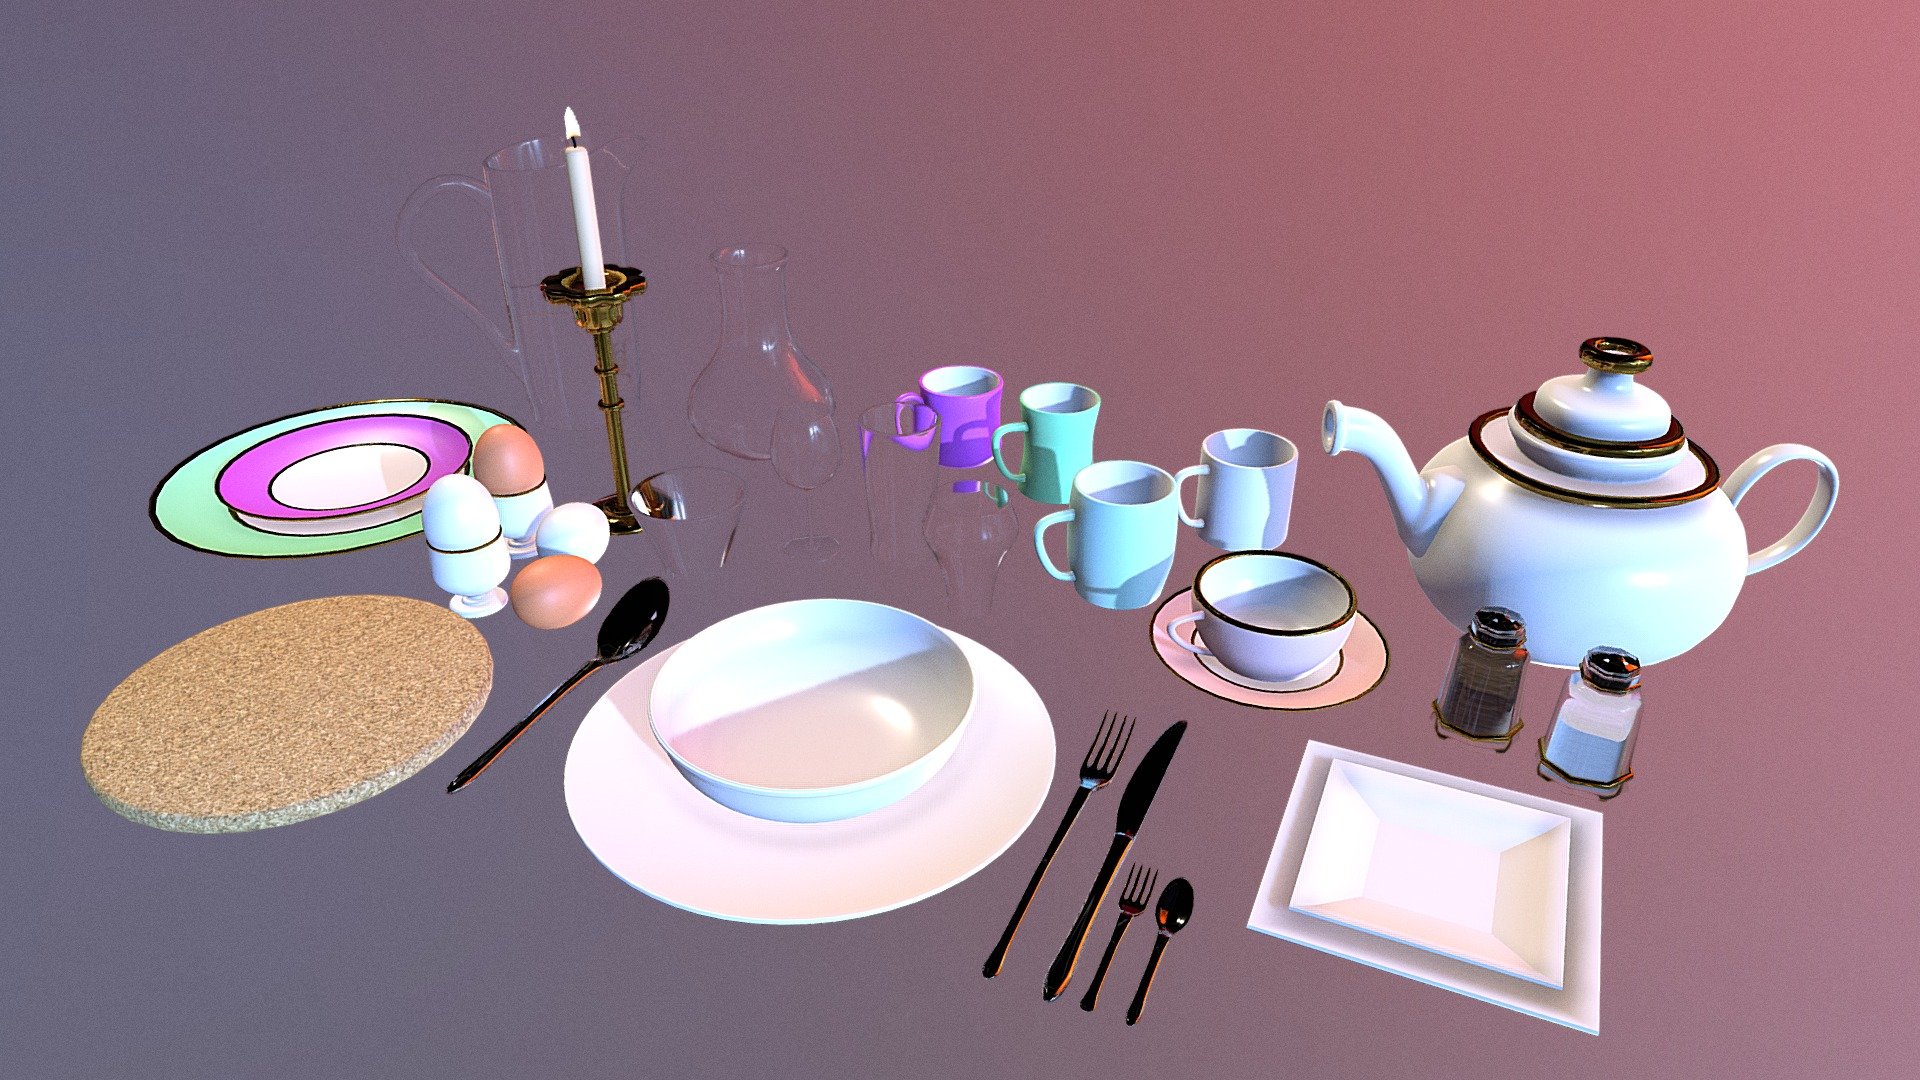 This dinnerware set includes a total of 30 dinner/breakfast/lunch related items of which they are all neatly seperated into their own individual files, and afcourse the scene itself in a .blend file. This set includes the following:

Bowl, Candle with holder, Coaster, A Dining Table, Egg Holder, Egg, Normal Plate, Fancy Plate, Square Plate, Square Plate Big, Saucer, Fork, Knife, Spoon, Small Fork, Small Spoon, Glass Curvy, Glass Long, Glass Short, Mug Normal, Mug Long, Mug Short, Mug Smooth, Tea Cup, Tea Pot, Pepper Shaker, Salt Shaker, Vase, Water Jug, Wine Glass,

Textures: Cork Albedo, Candle Alpha, Pepper, Salt, Gold Albedo, Gold Metallic, Gold Roughness, Gold Height, Gold Normal, Wood Albedo, Wood Roughness, Wood Normal, - Dinnerware Set - Buy Royalty Free 3D model by Harold P. de Boer (@Harold1995) 3d model